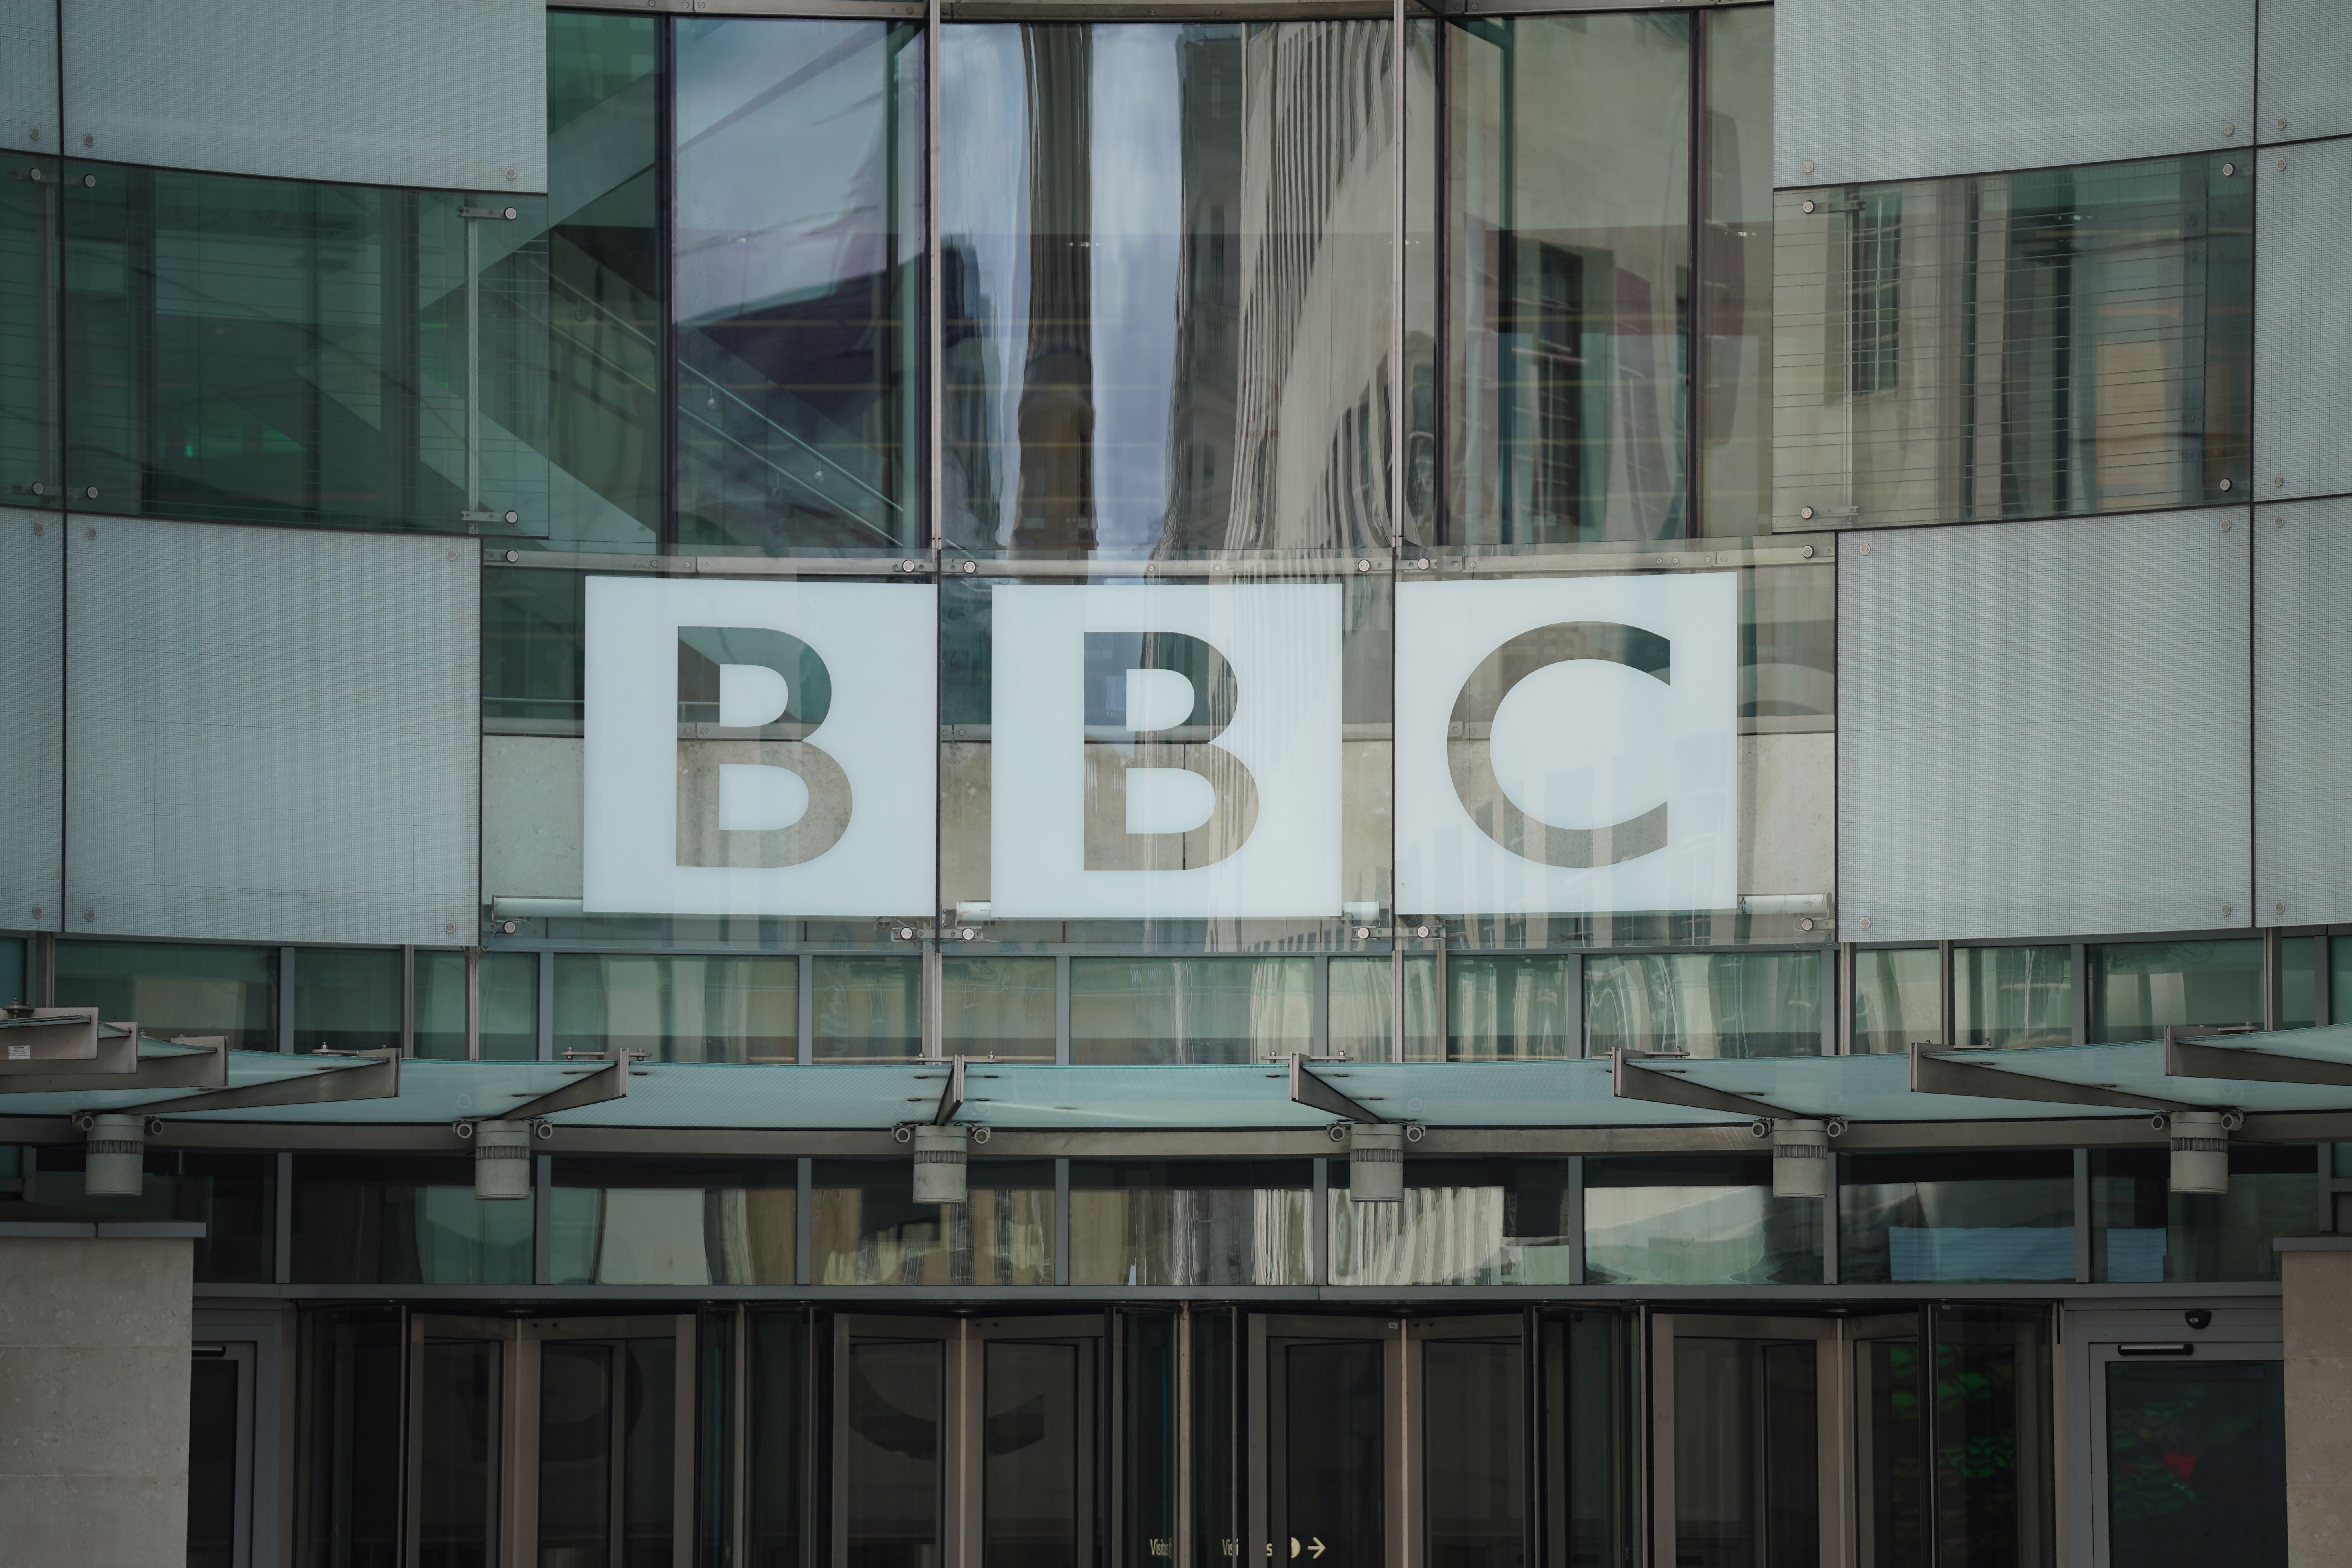 The government has set out reforms to help bolster public confidence in the BBC’s impartiality and complaints system